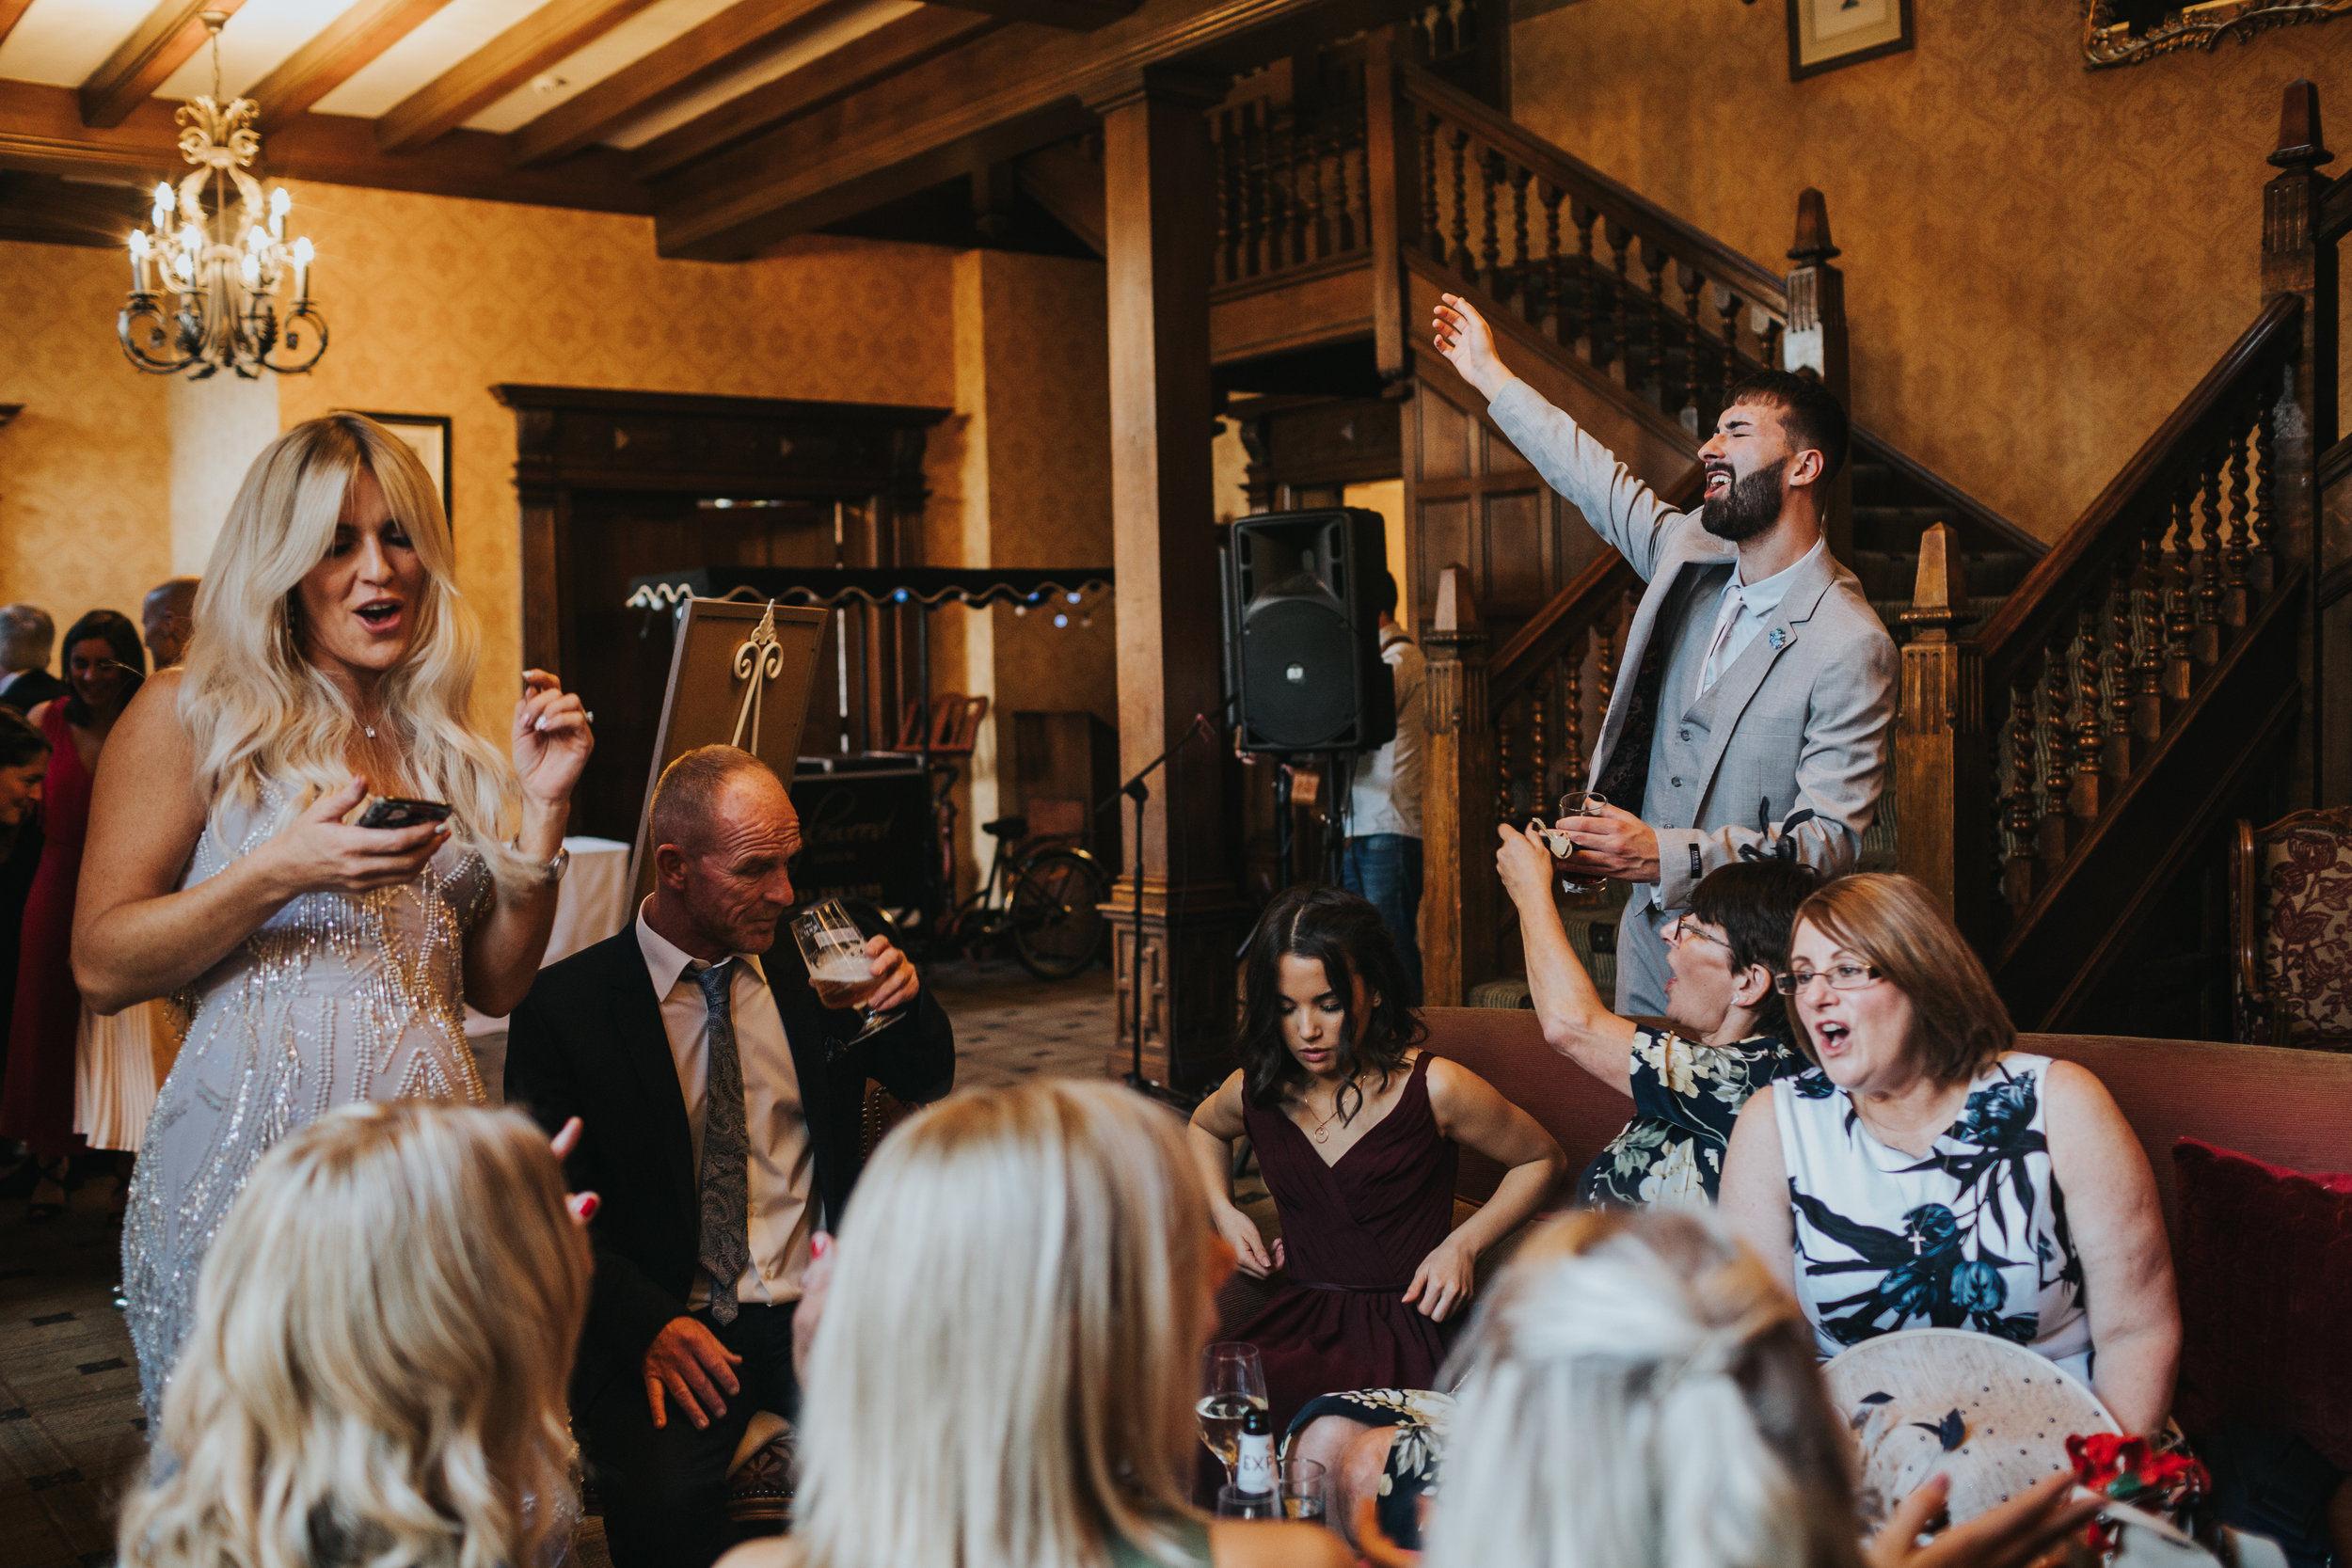 Wedding guests sing together.